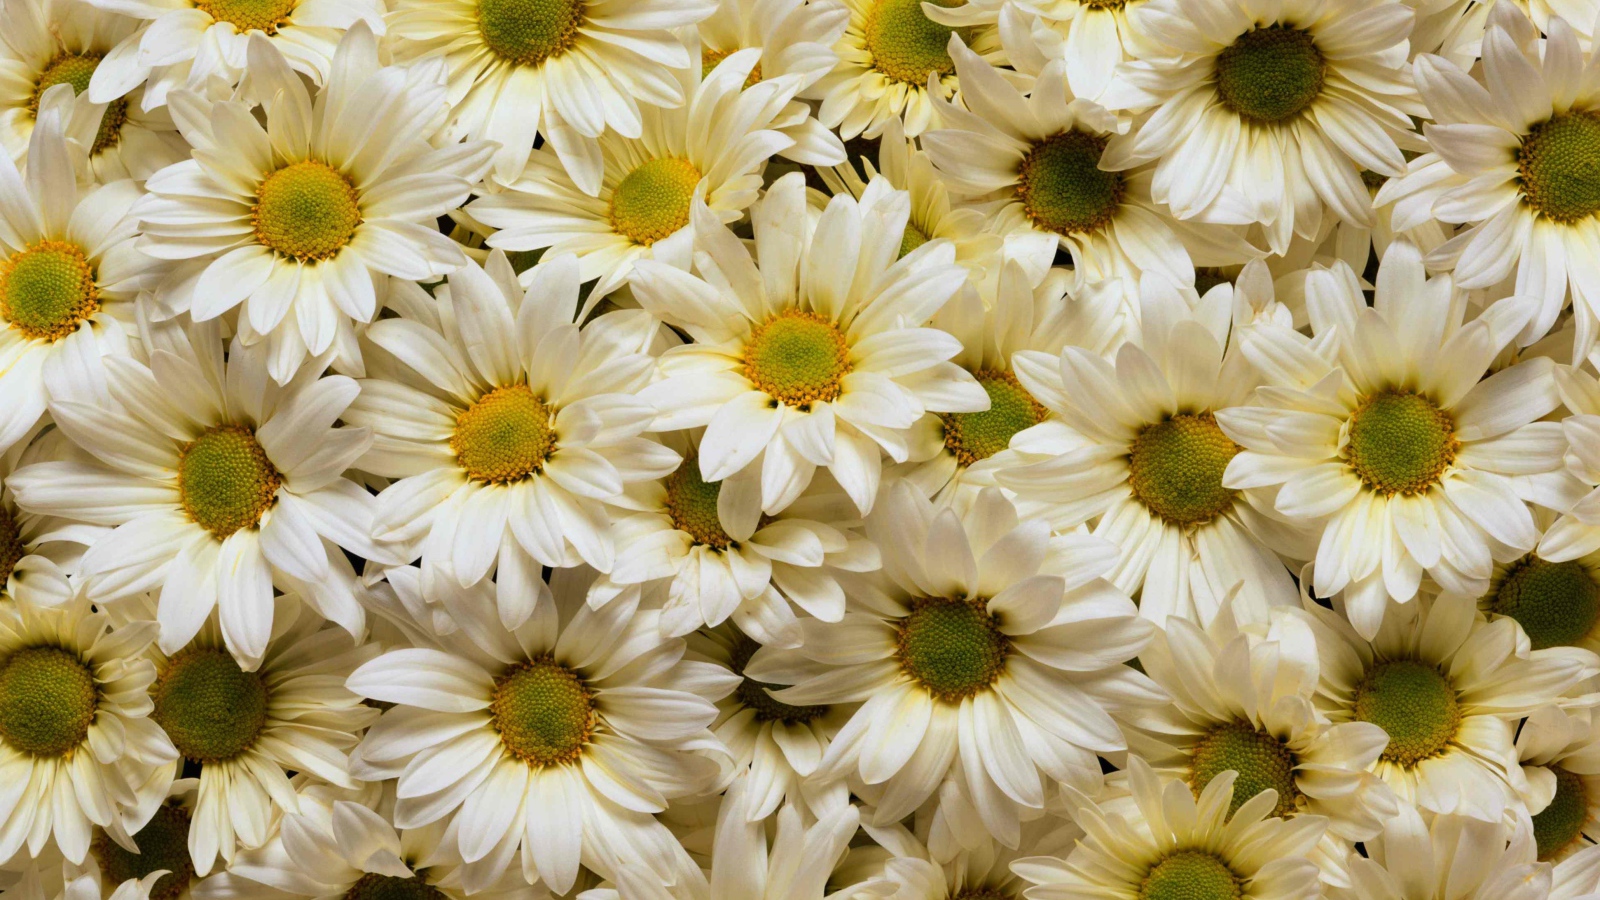 A lot of white chrysanthemums with yellow centers